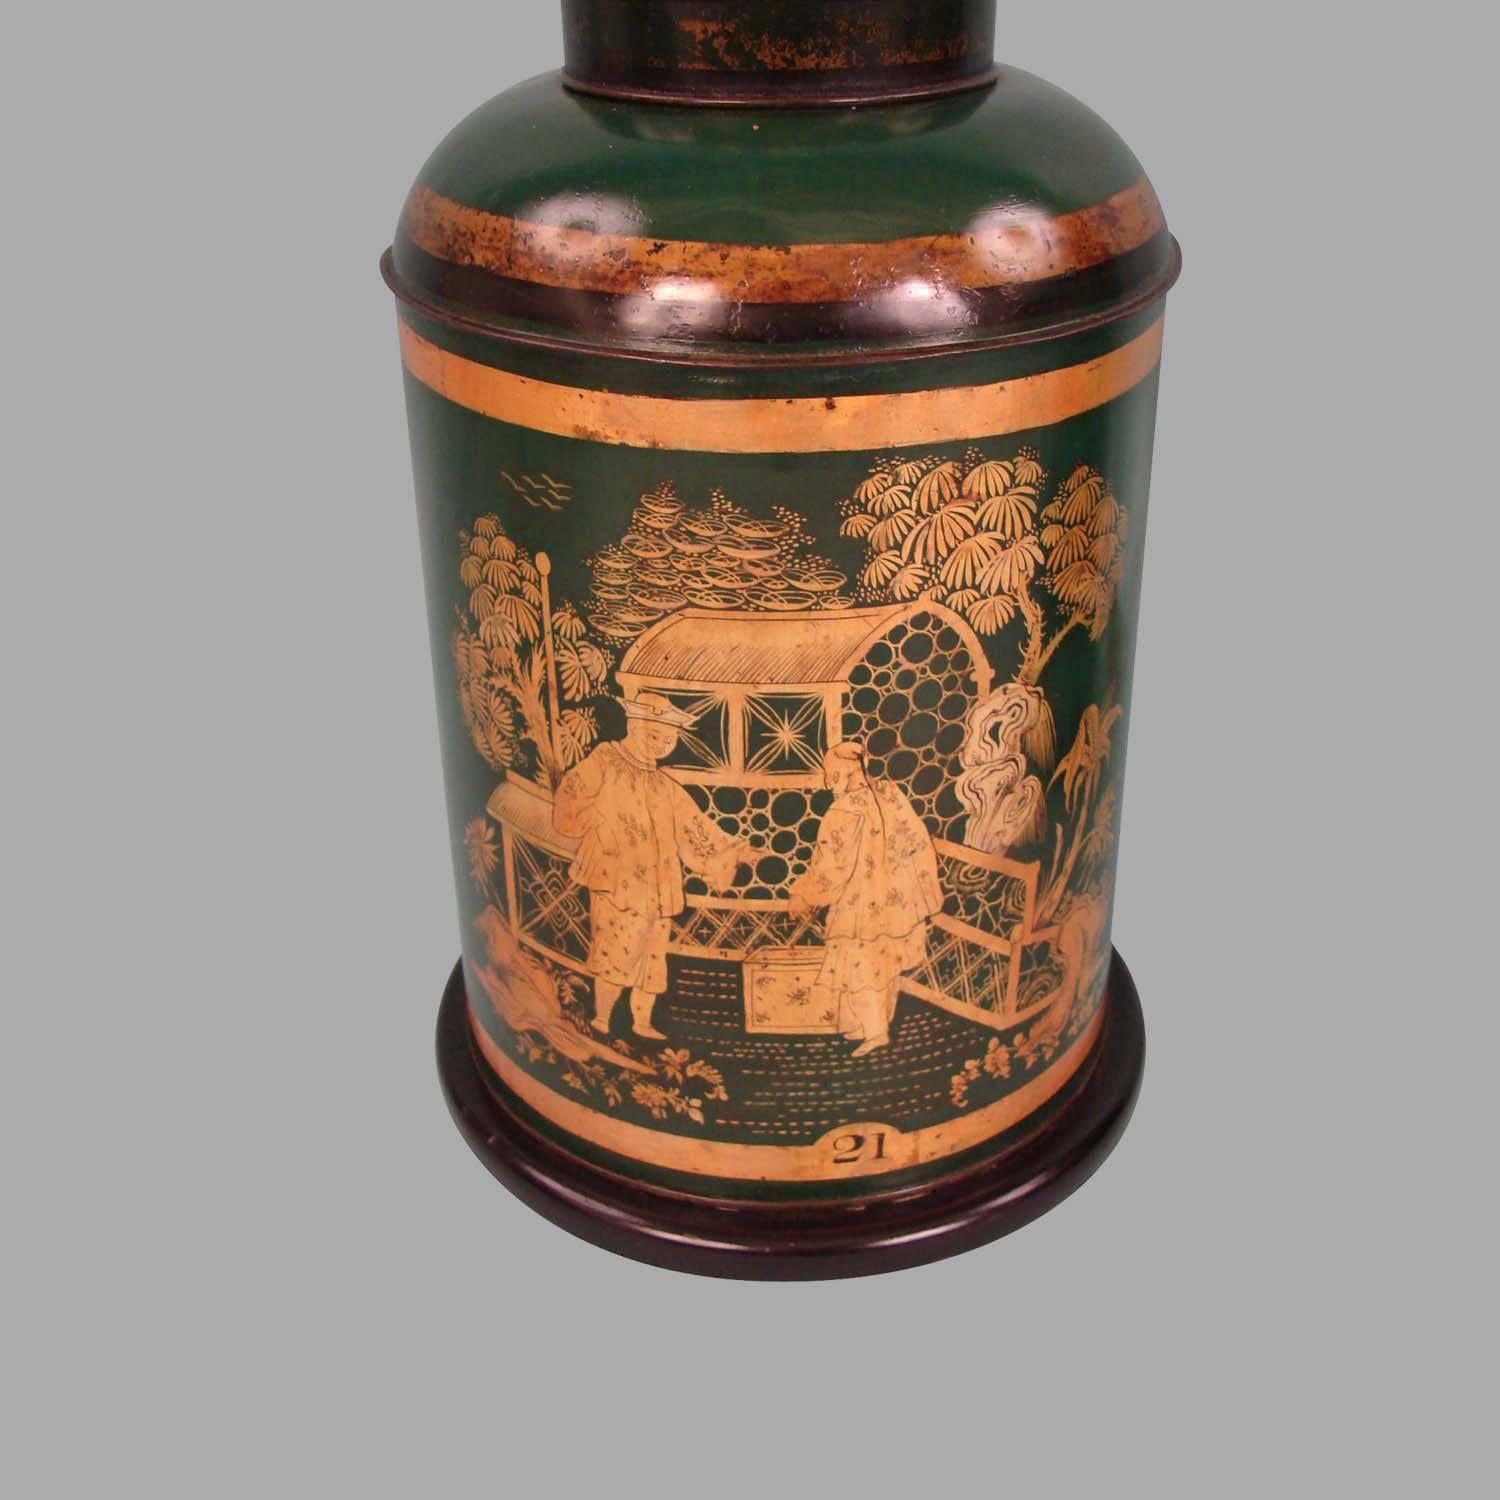 A well-decorated pair of 19th century Chinese export dark green and gold decorated tea canisters depicting figures in a garden setting, one marked 12 the other 21. Now electrified with wooden bases and fitted as lamps. Decoration refreshed.